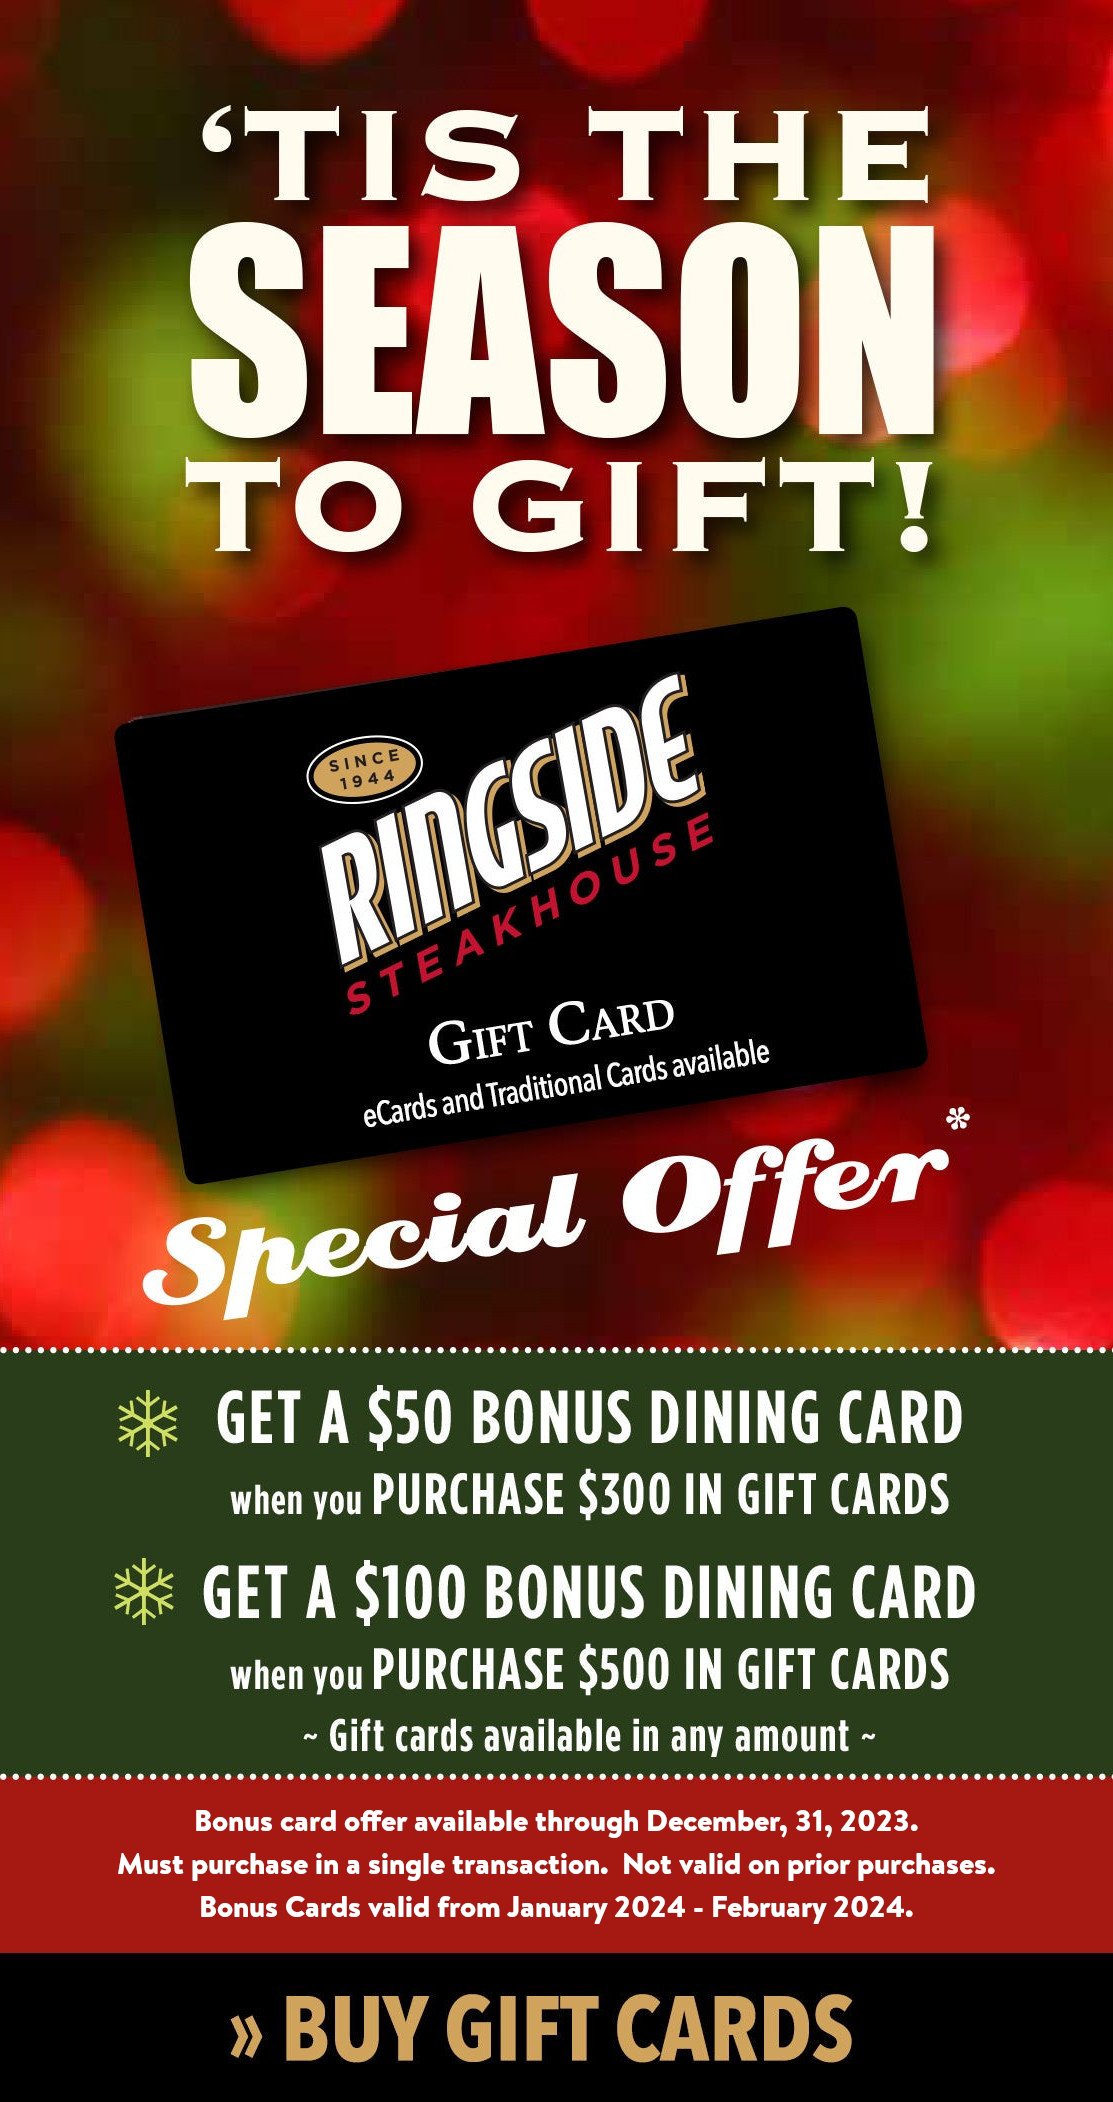 E-Gift Cards, Exciting Offers